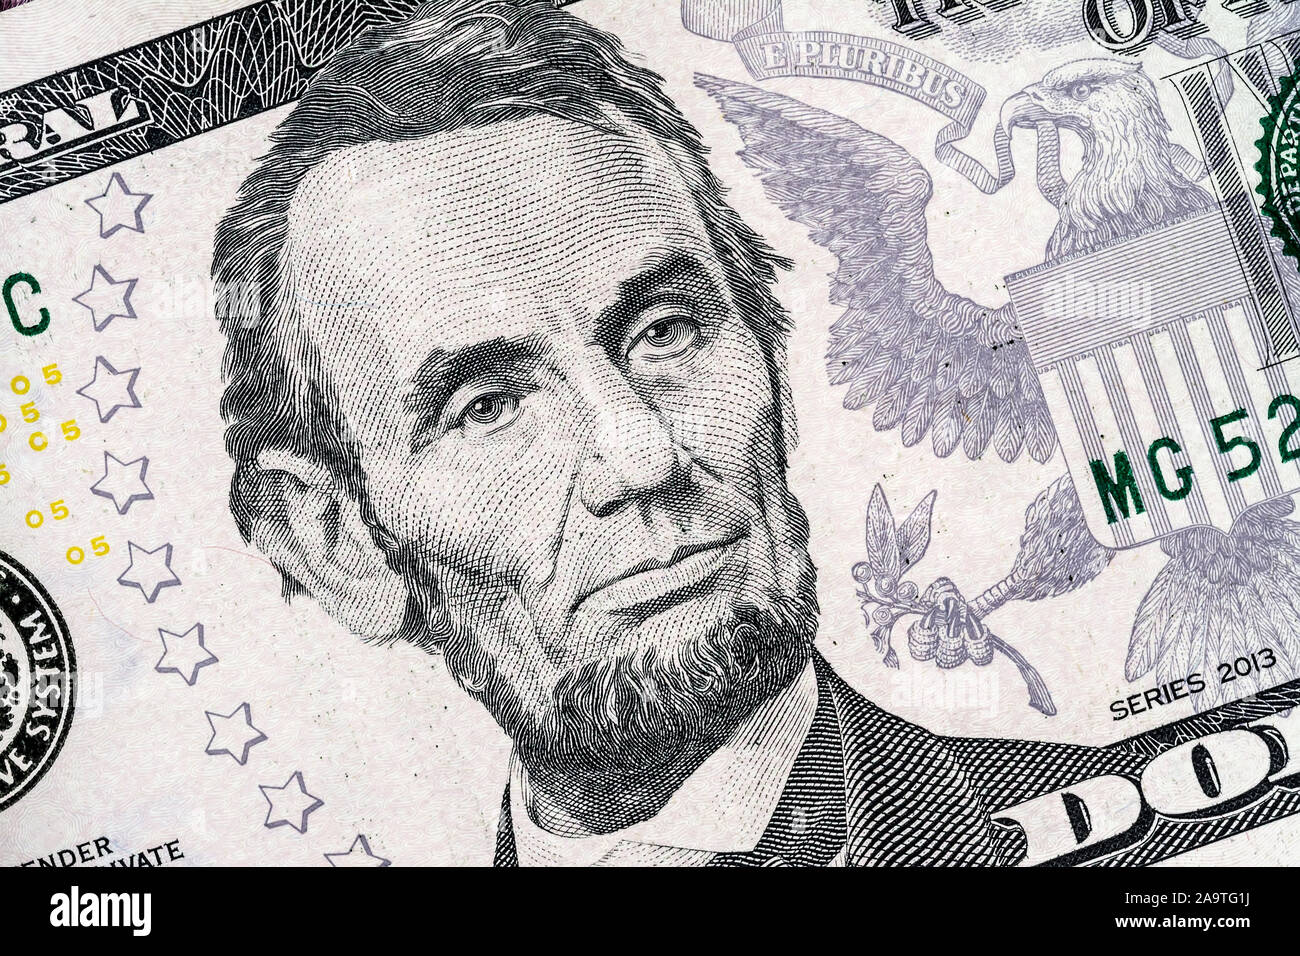 Close-up portrait of Abraham Lincoln on a 5 US dollars banknote. Stock Photo